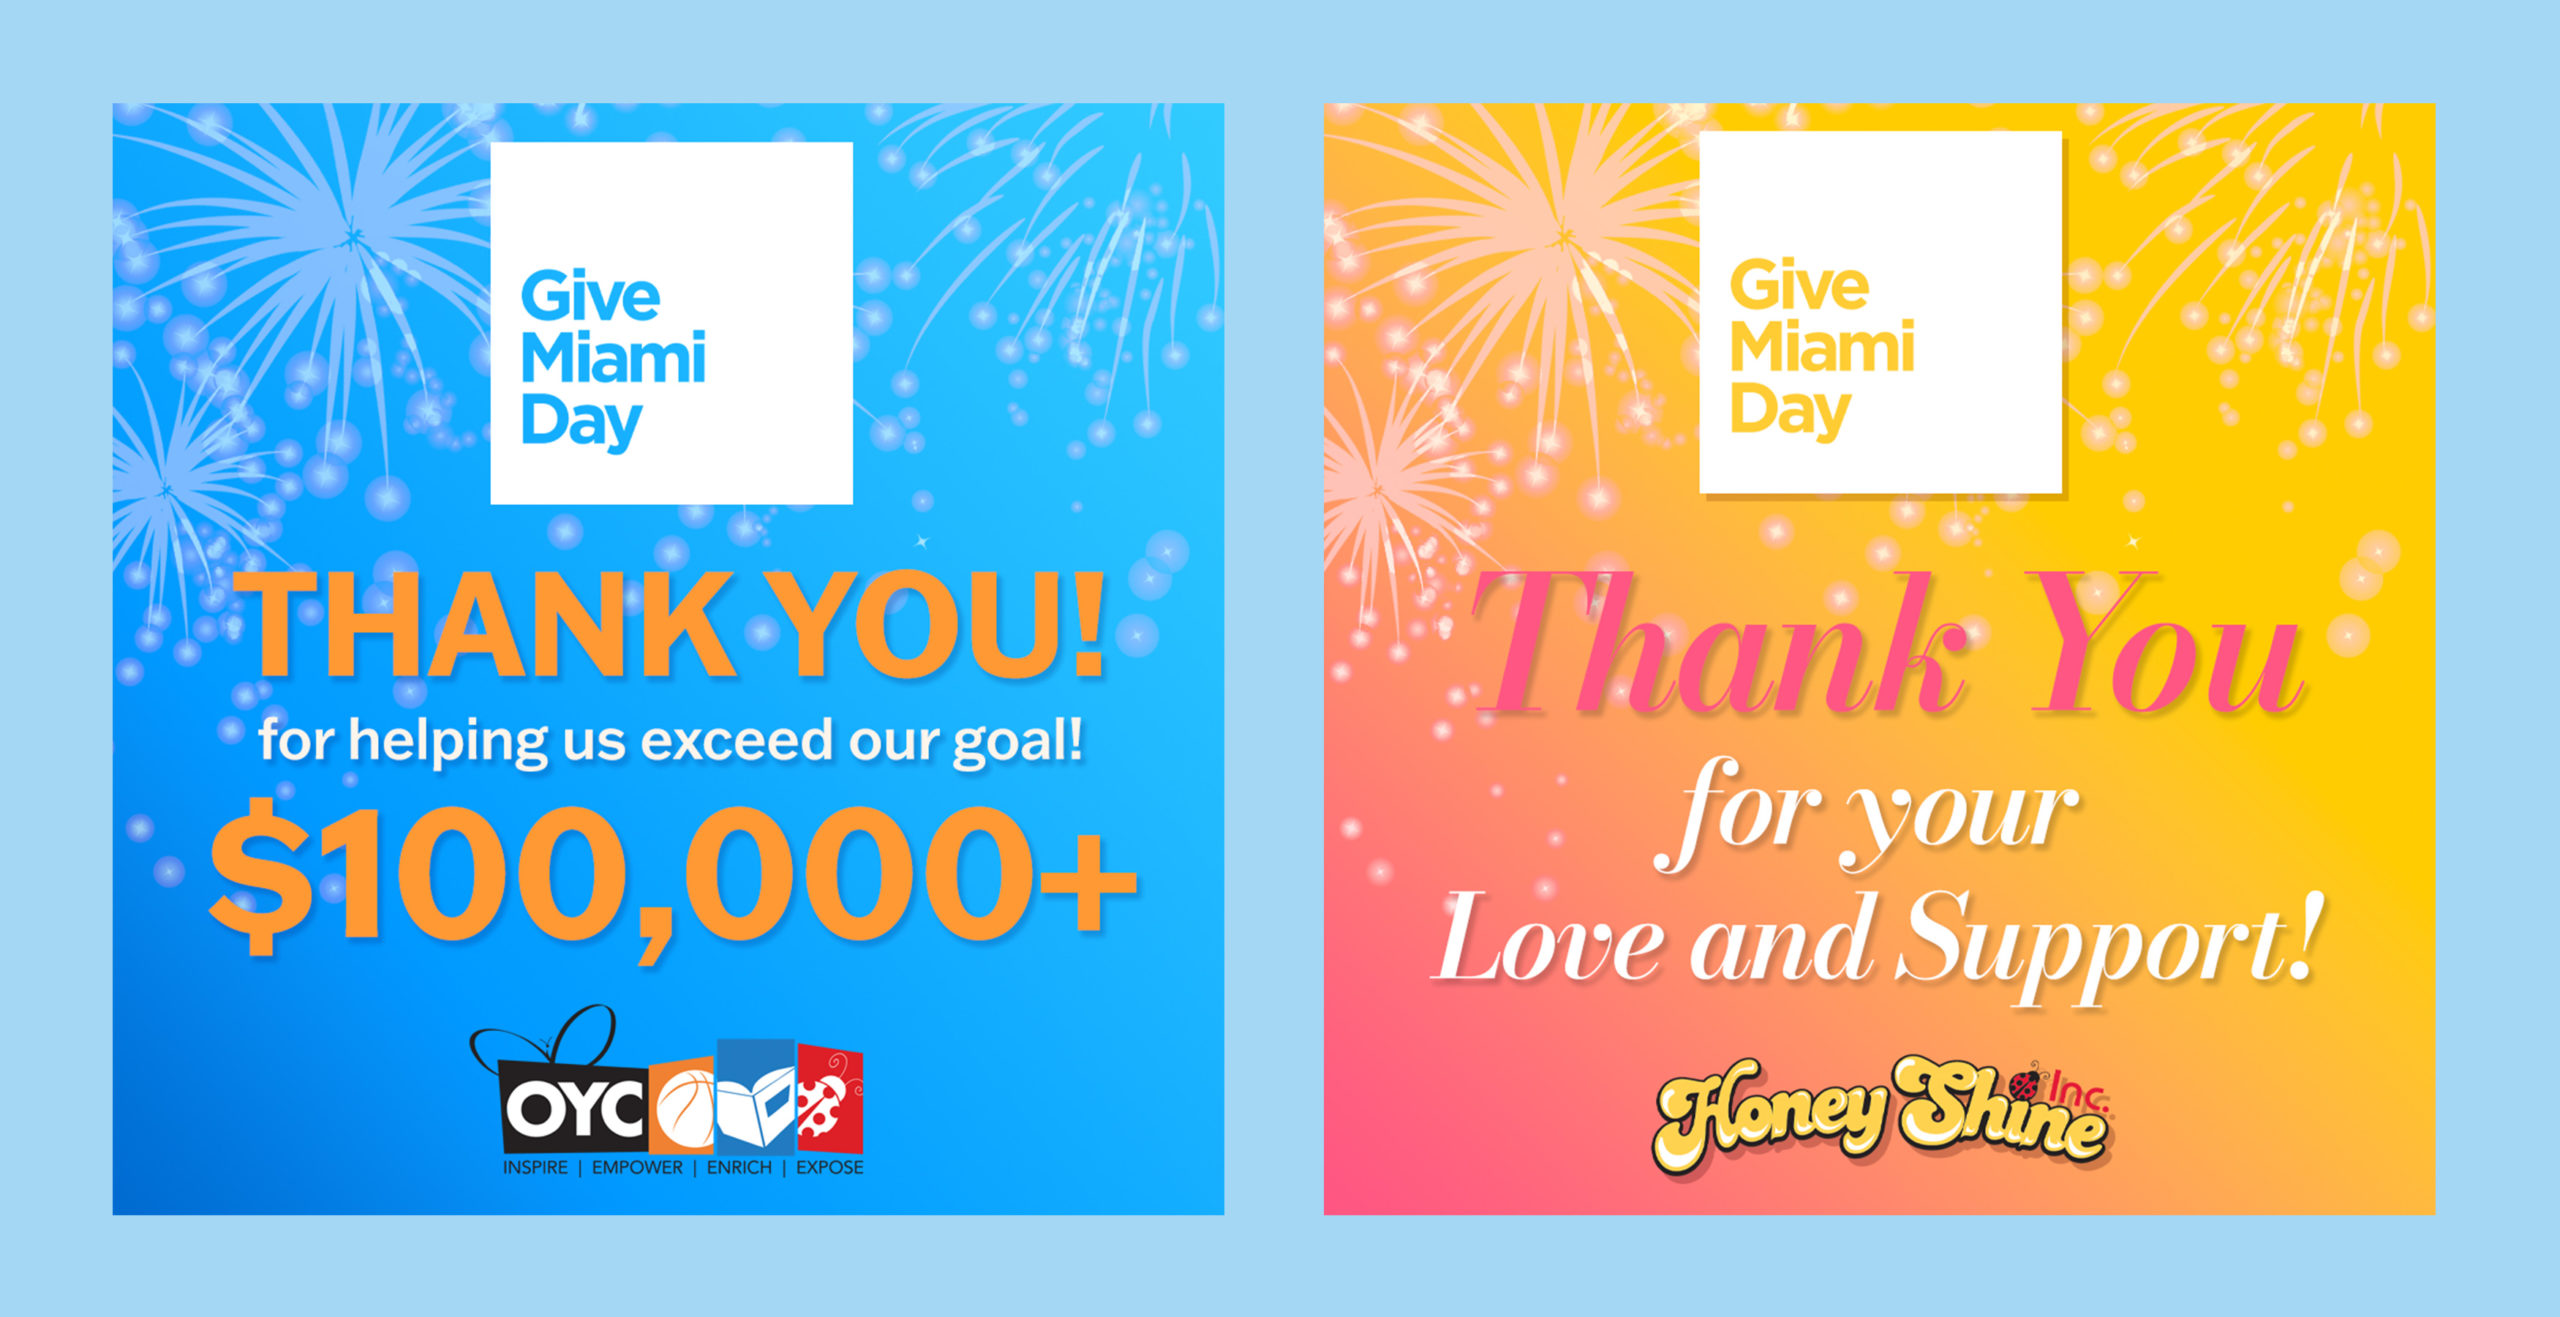 OYC & Honey Shine thank you for supporting us on Give Miami Day